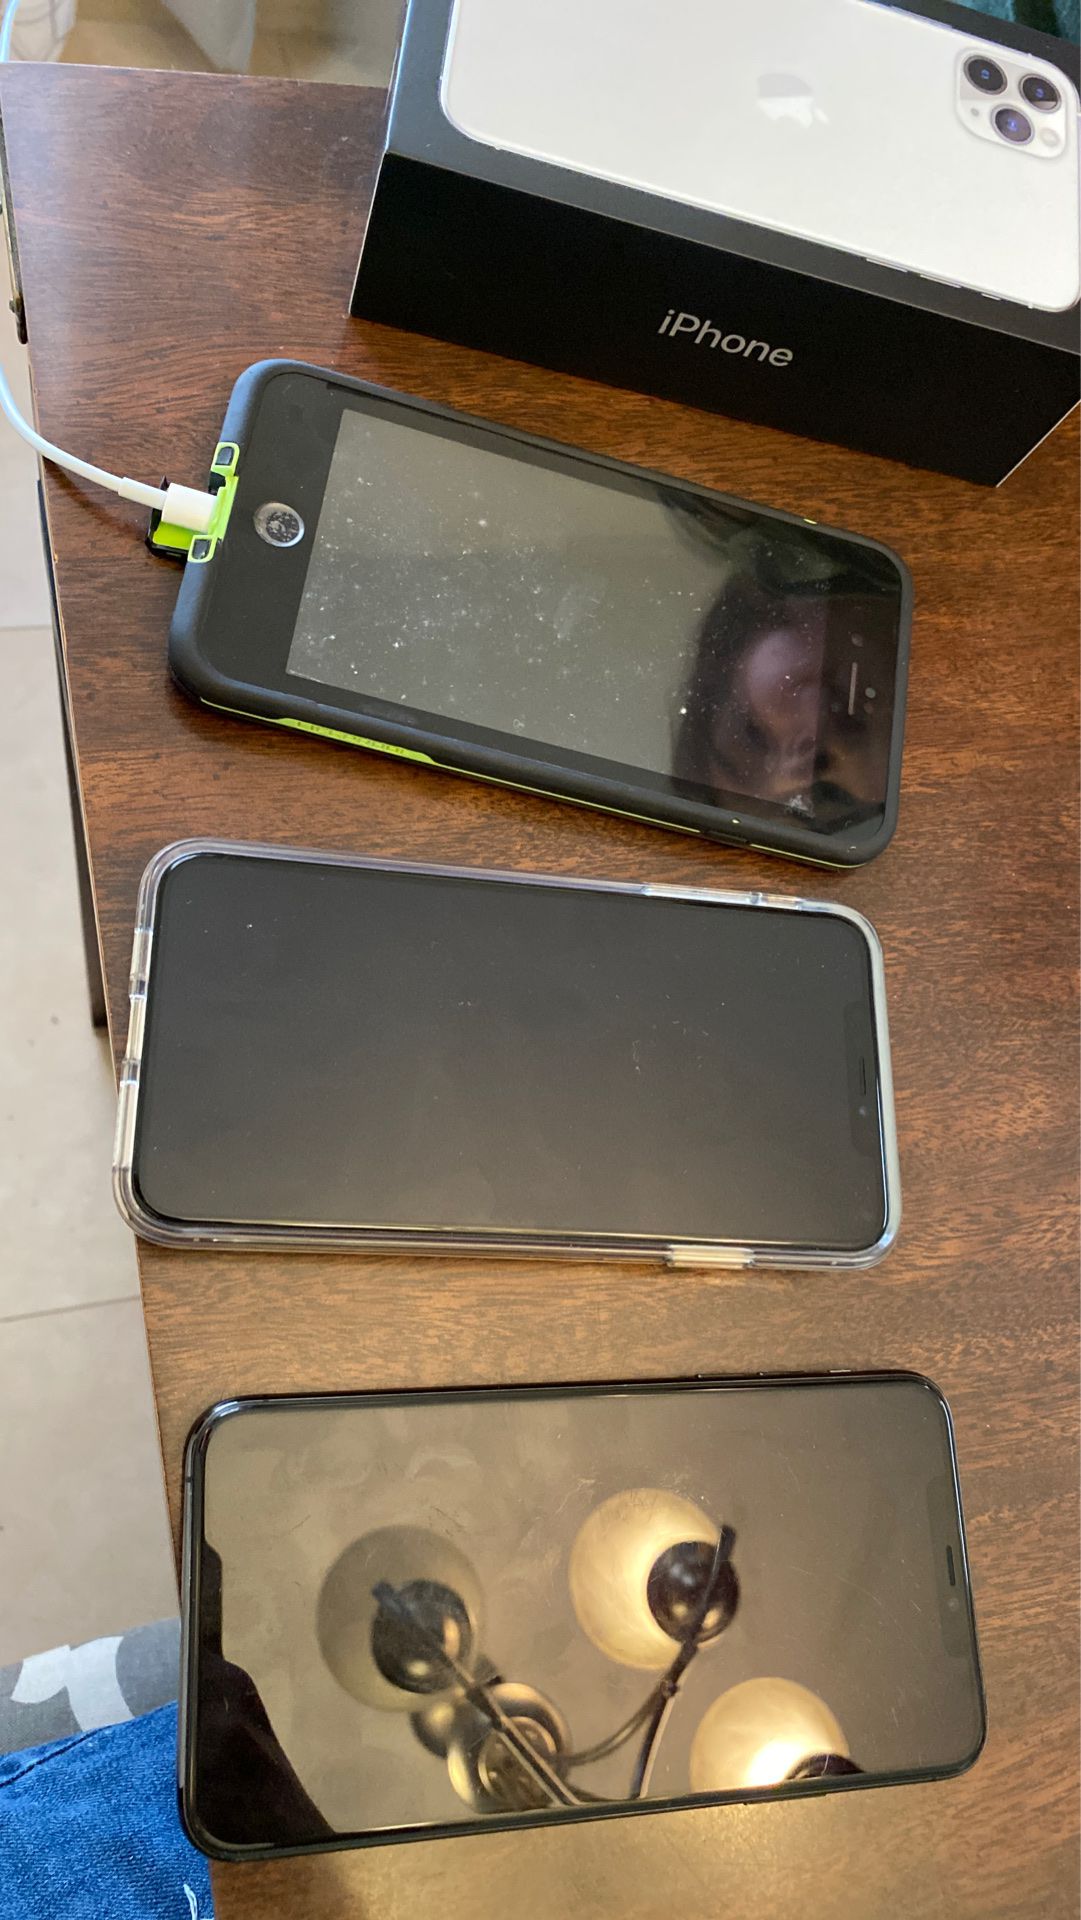 I have iPhone 8 Plus, iPhone X max, and iPhone 11 Pro Max